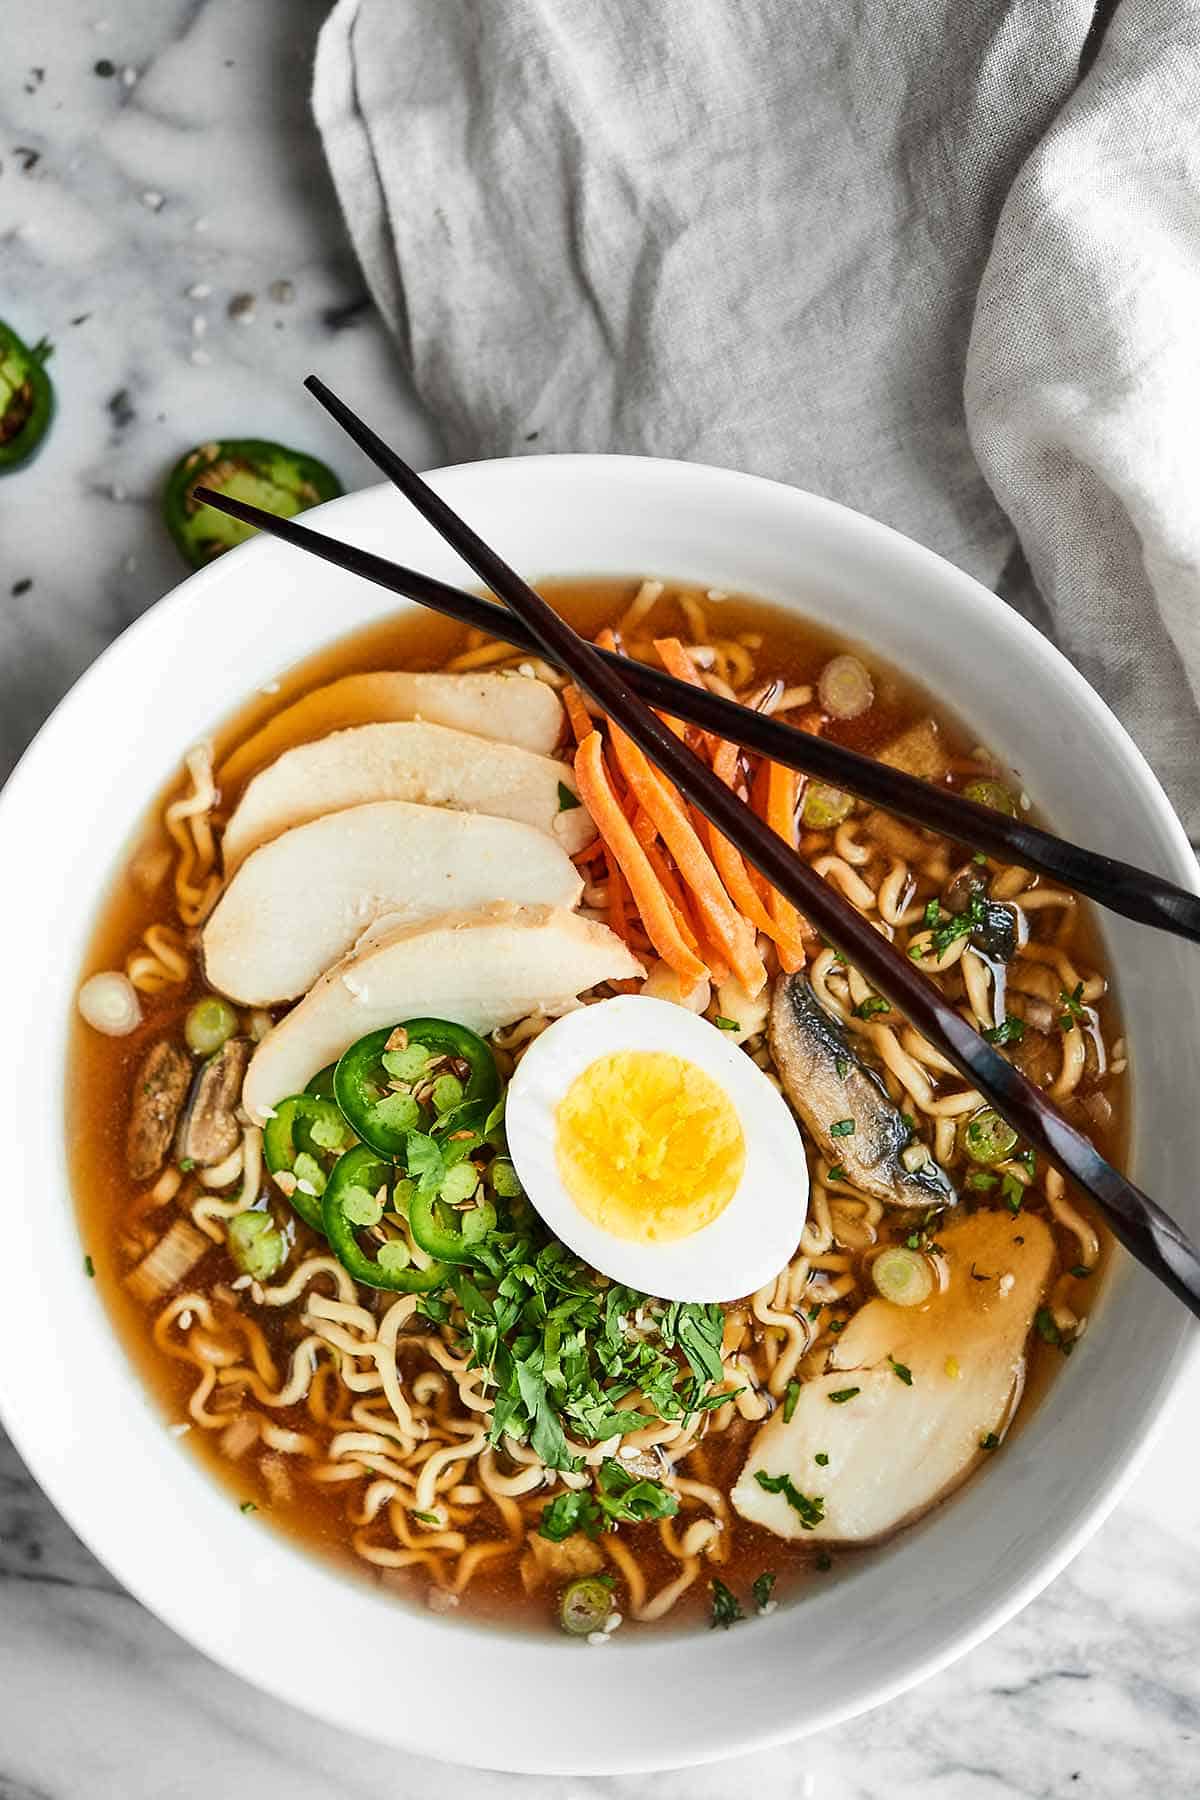 Slower cooker ramen in a bowl with chopsticks above